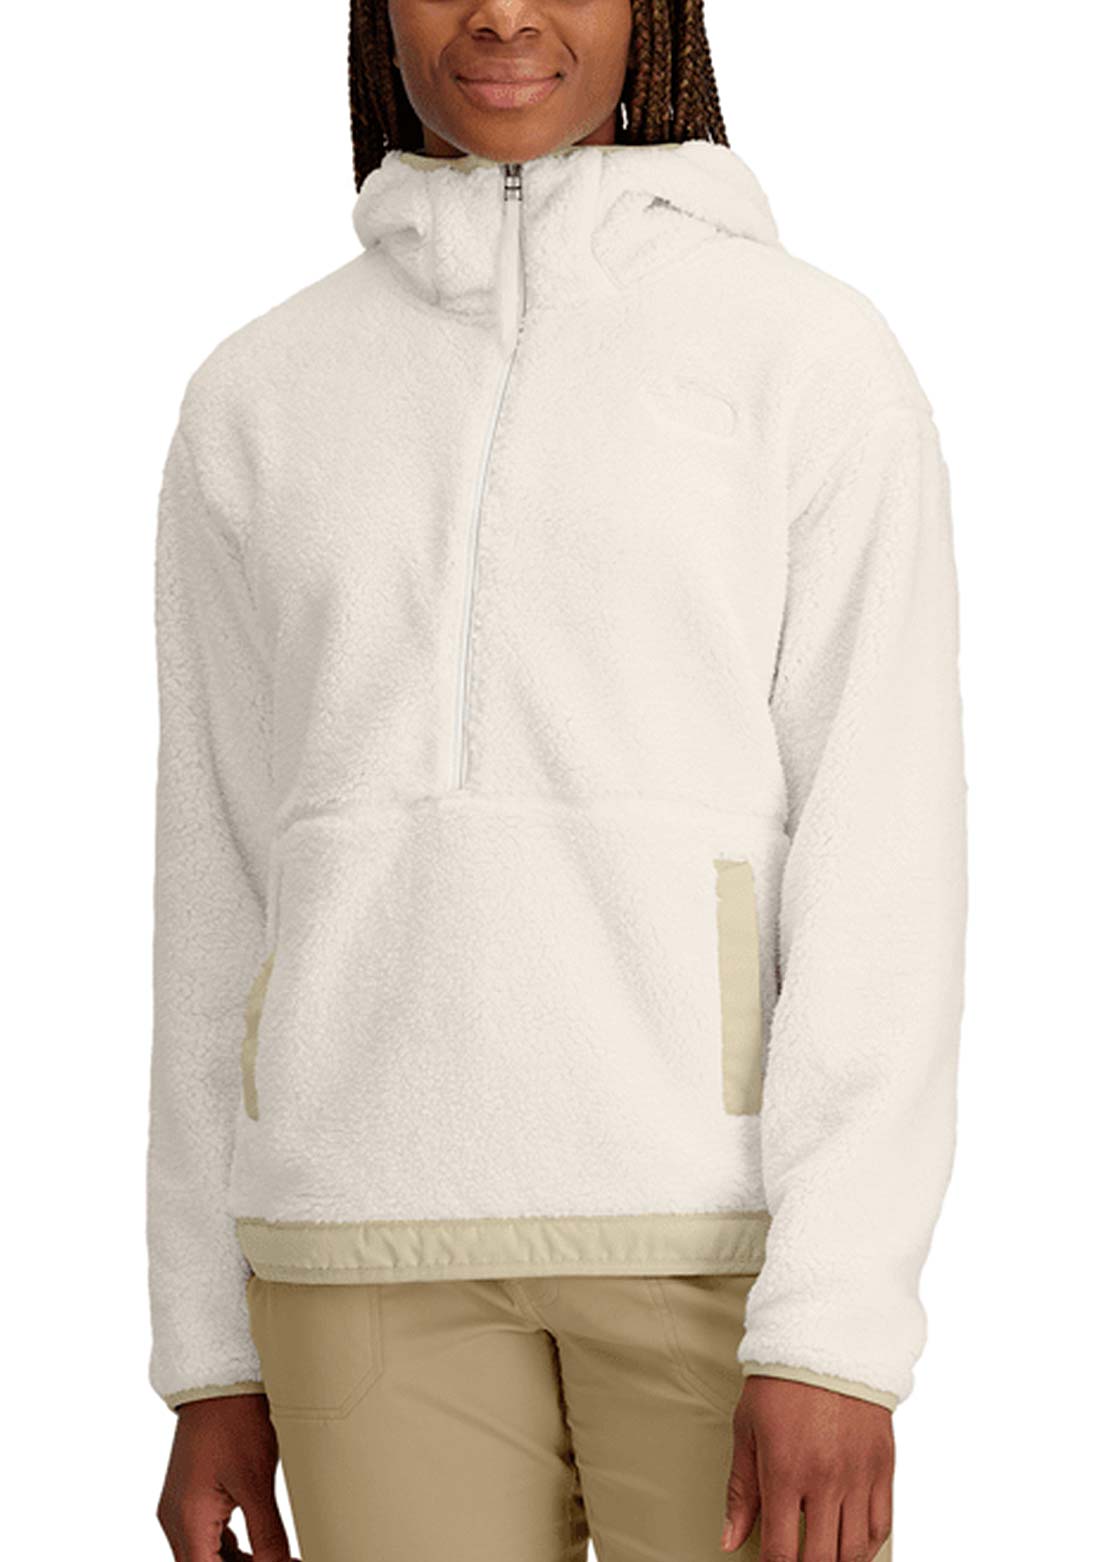 The North Face Womens Campshire Bomber Fleece in White